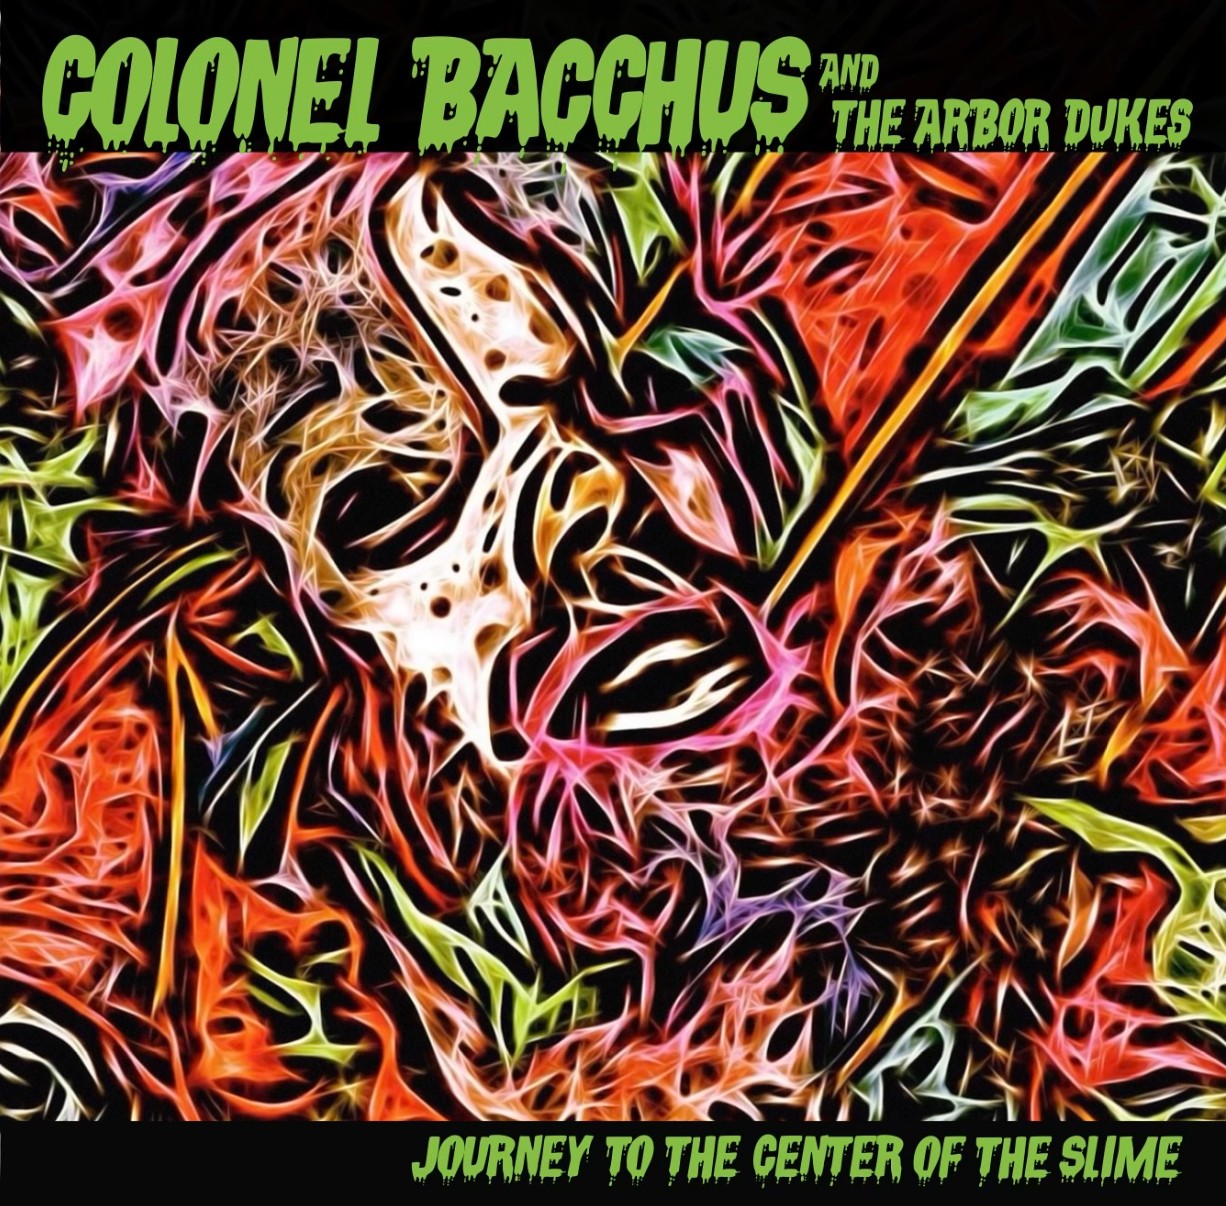 Images show cover and back album art. The front cover is a highly colorful, high-contrast and abstract image of a face embedded or melting into a surrounding, chaotic pattern of jagged shapes that evoke flames or sharp shards. Text is written in a green font that appears to be dripping: “COLONEL BACCHUS AND THE ARBOR DUKES, JOURNEY TO THE CENTER OF THE SLIME”